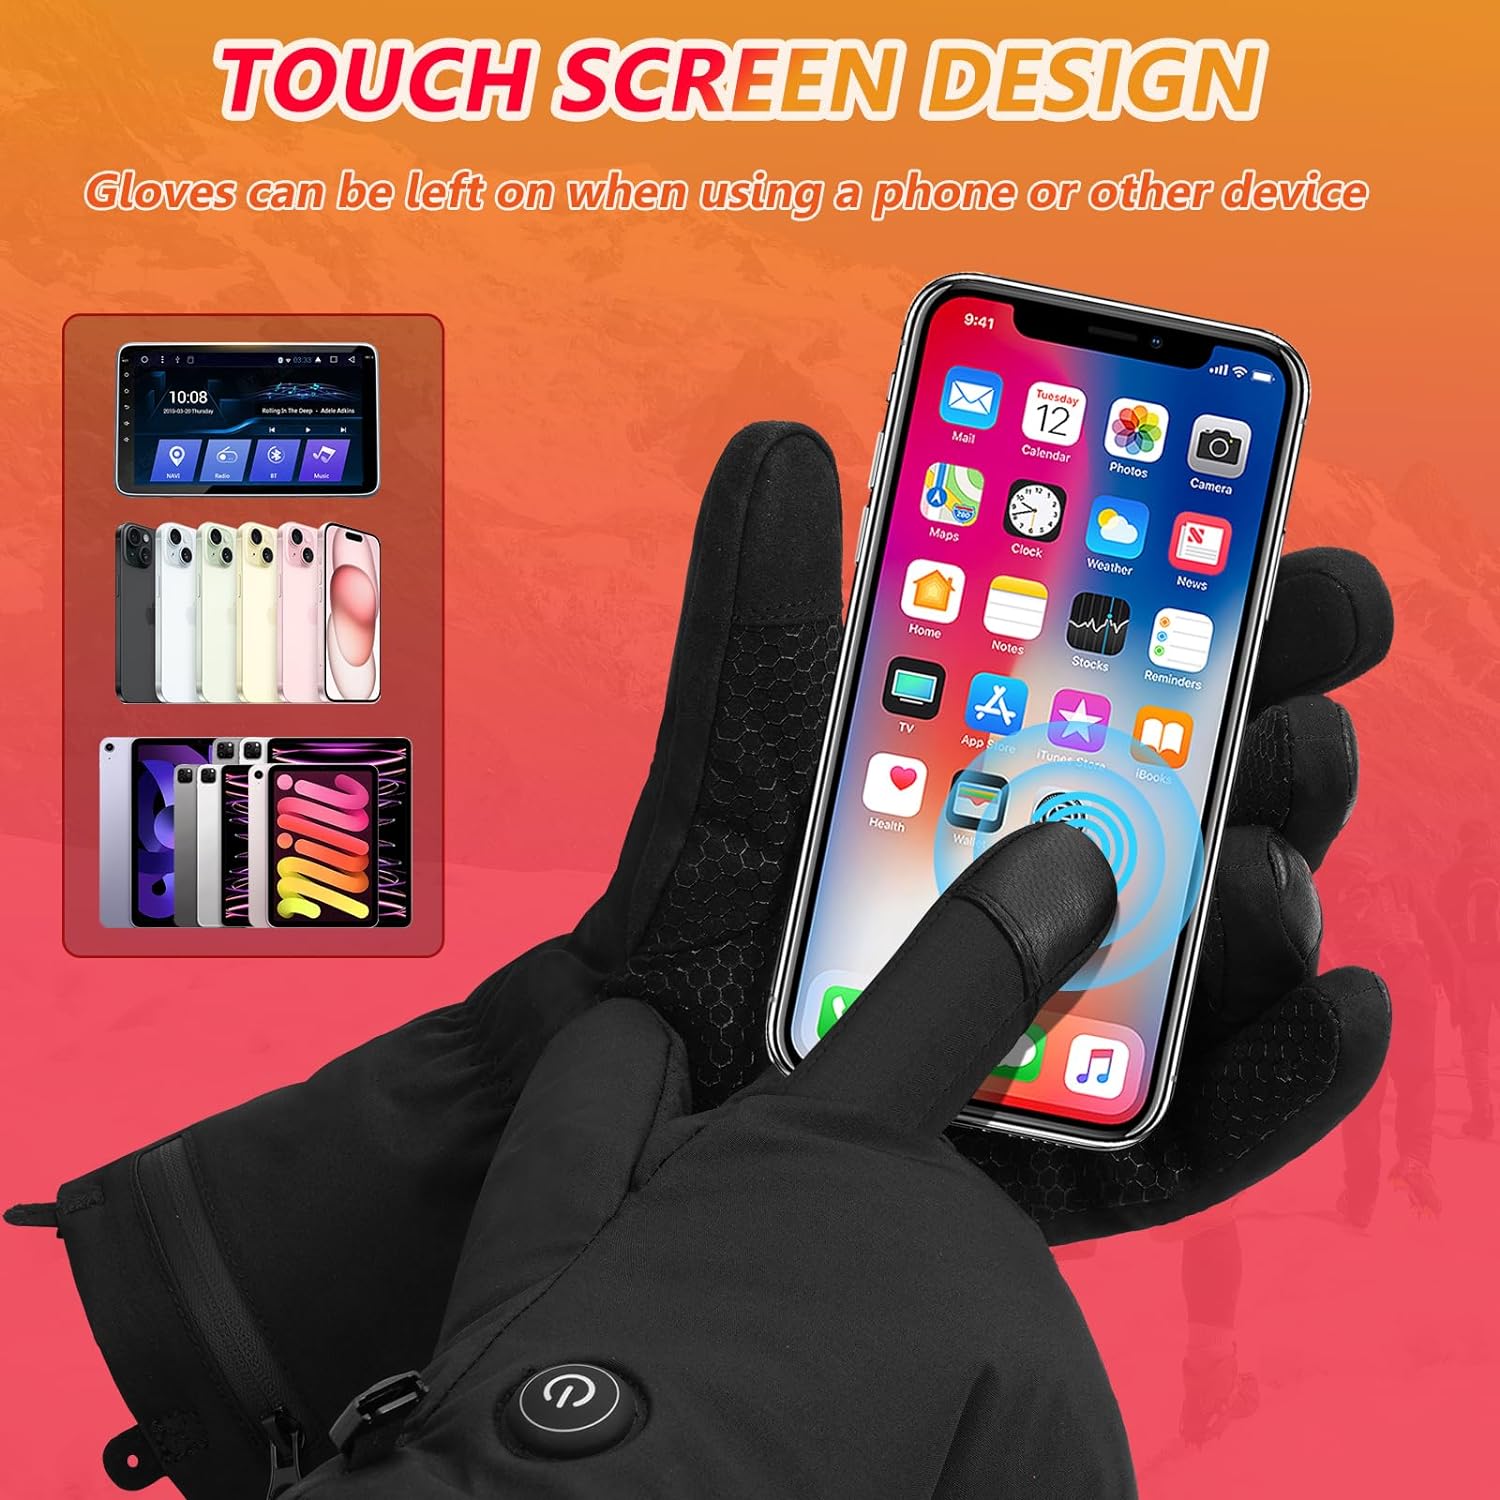 Hinsole Heated Gloves for Men and Women, Rechargeable Battery Heated Work Simple Hand Warmers Touchscreen Gloves Sports